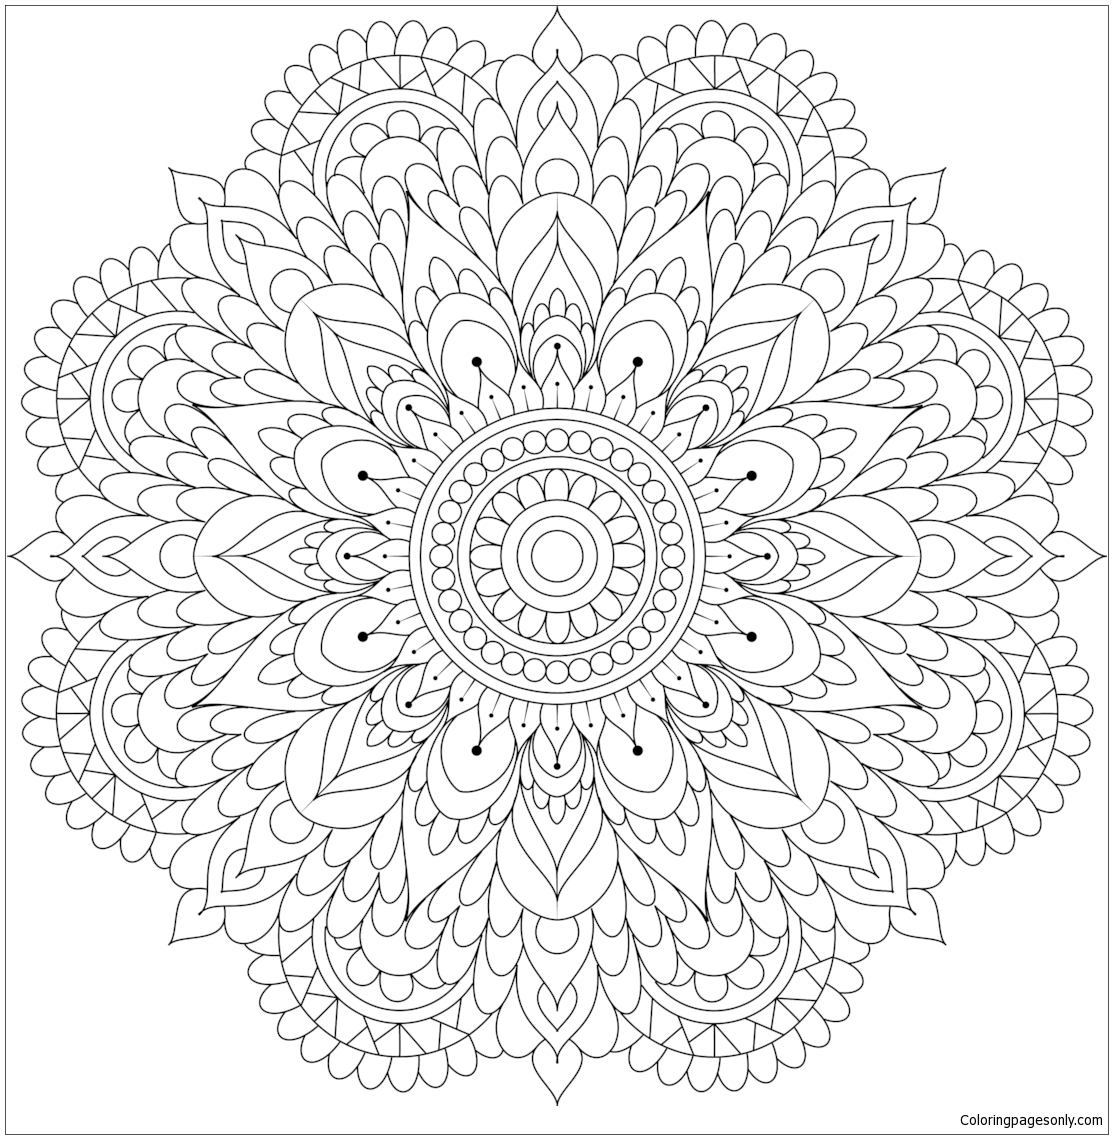 Morning Sunrise Mandala Coloring Page - Free Coloring Pages Online